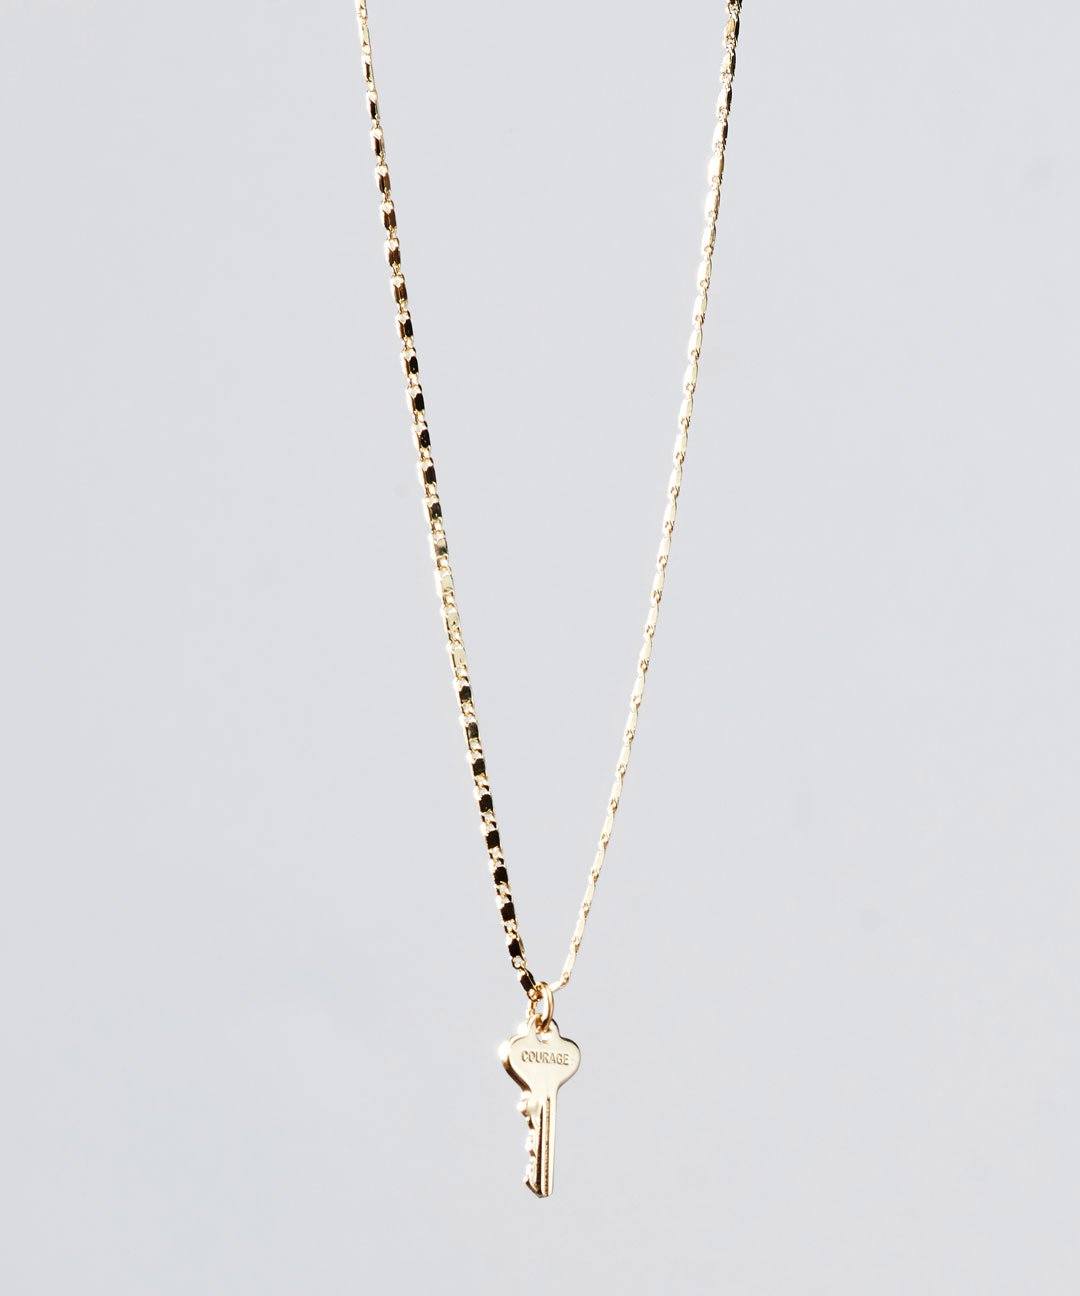 Gold Petite Key Necklace Necklaces The Giving Keys COURAGE GOLD